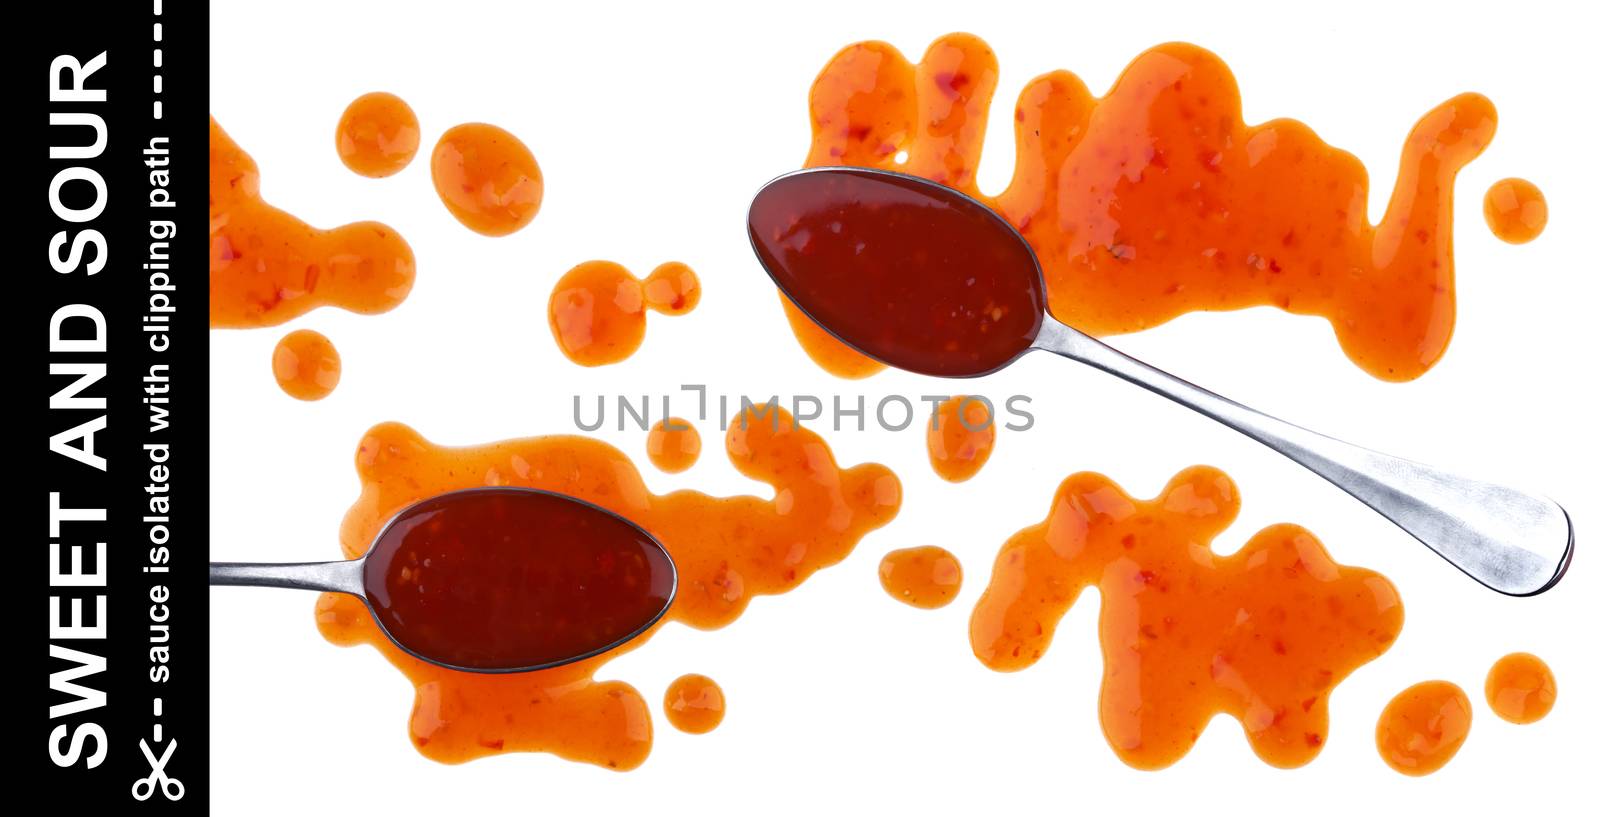 Sweet and sour sauce. Splashes and spilled orange sauce with spoon isolated on white background with clipping path. Top view